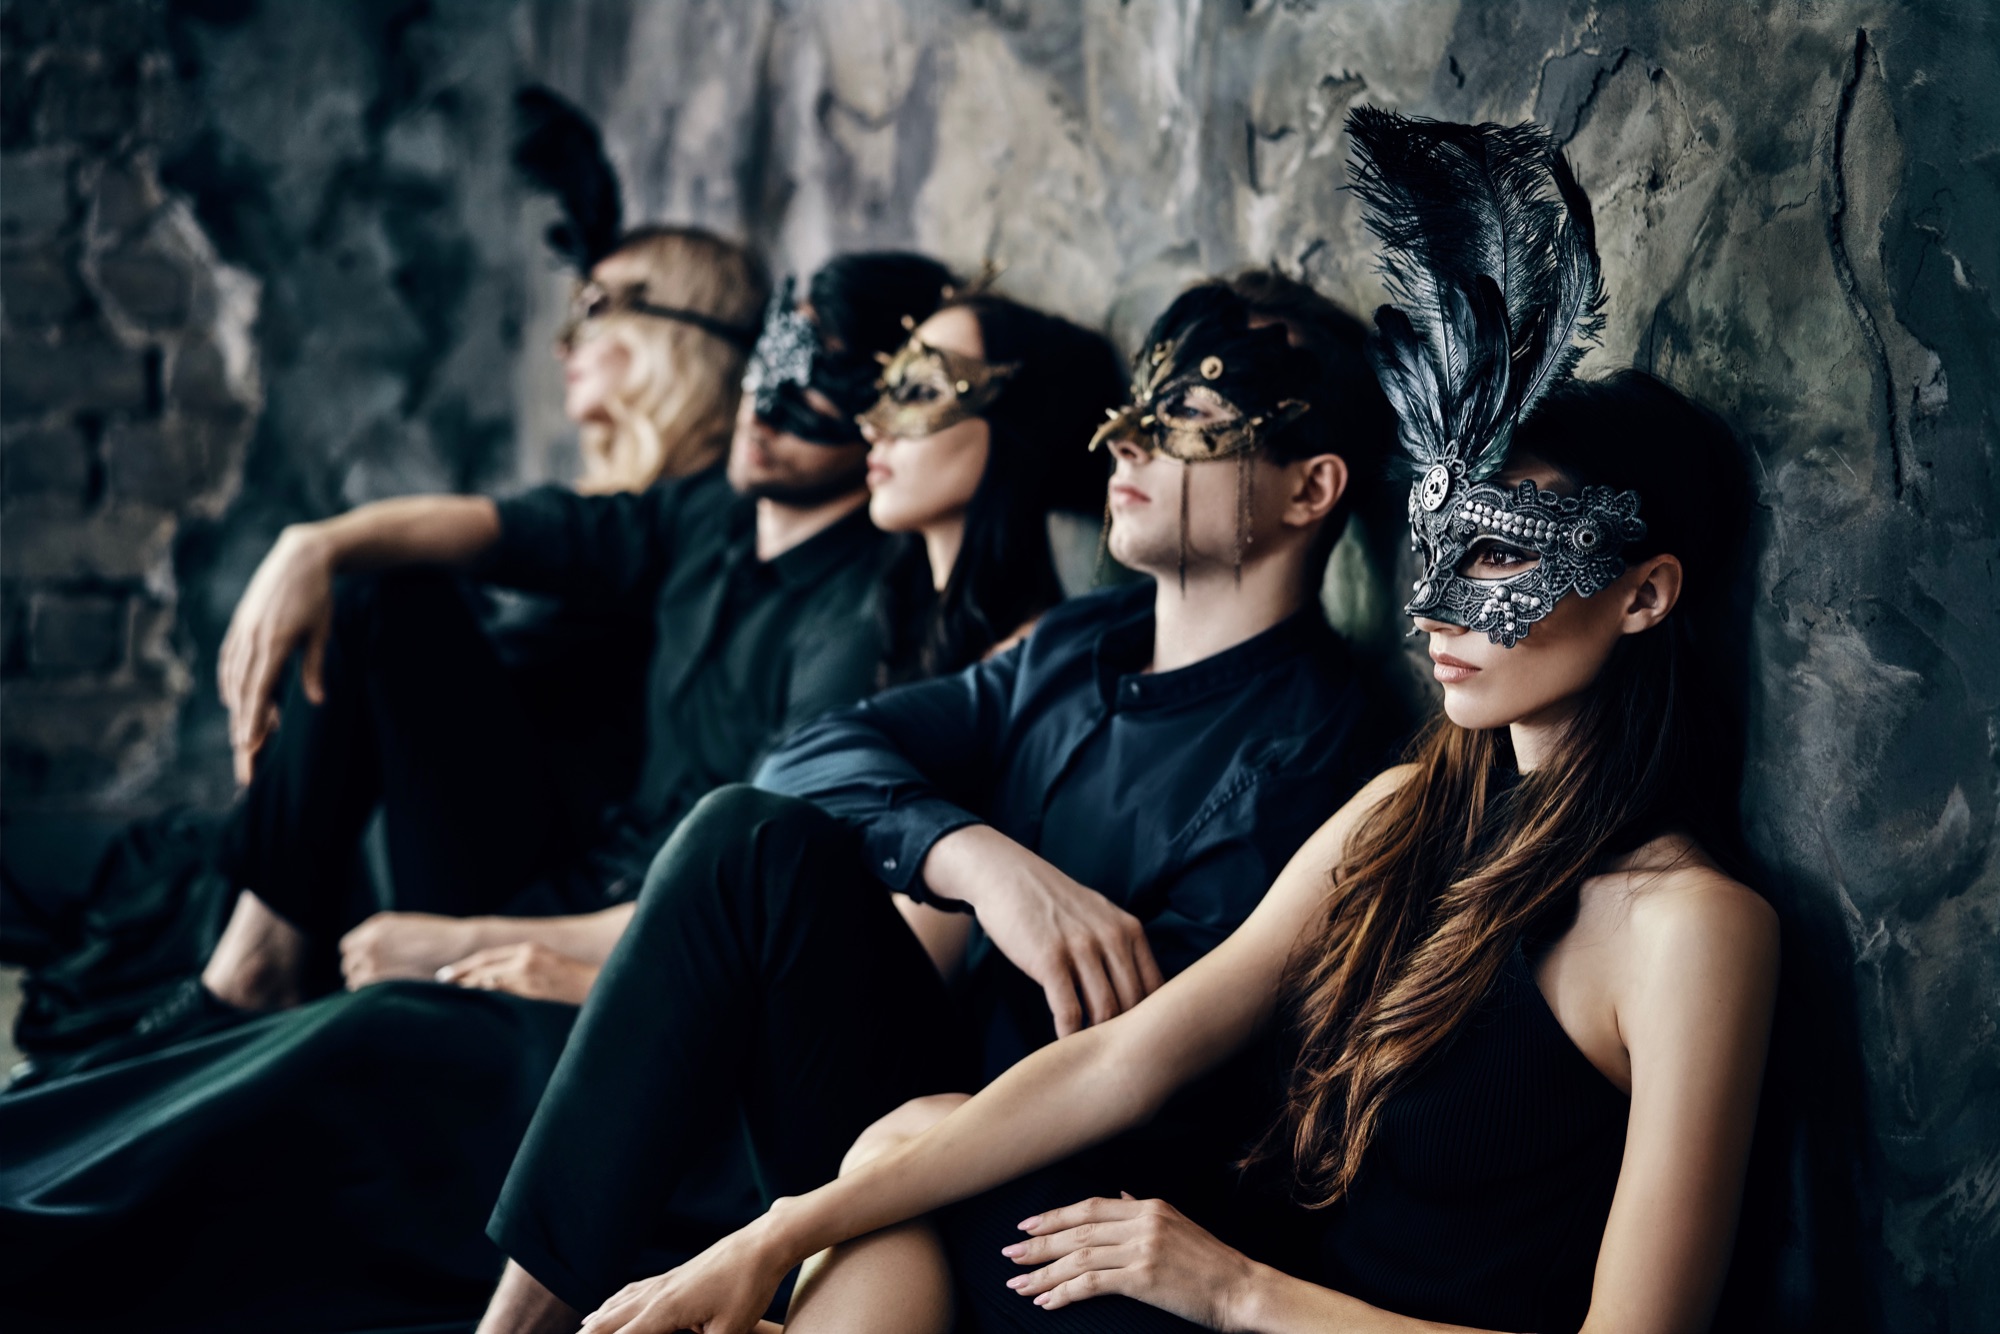 Group of five friends in masquerade masks sitting after a party